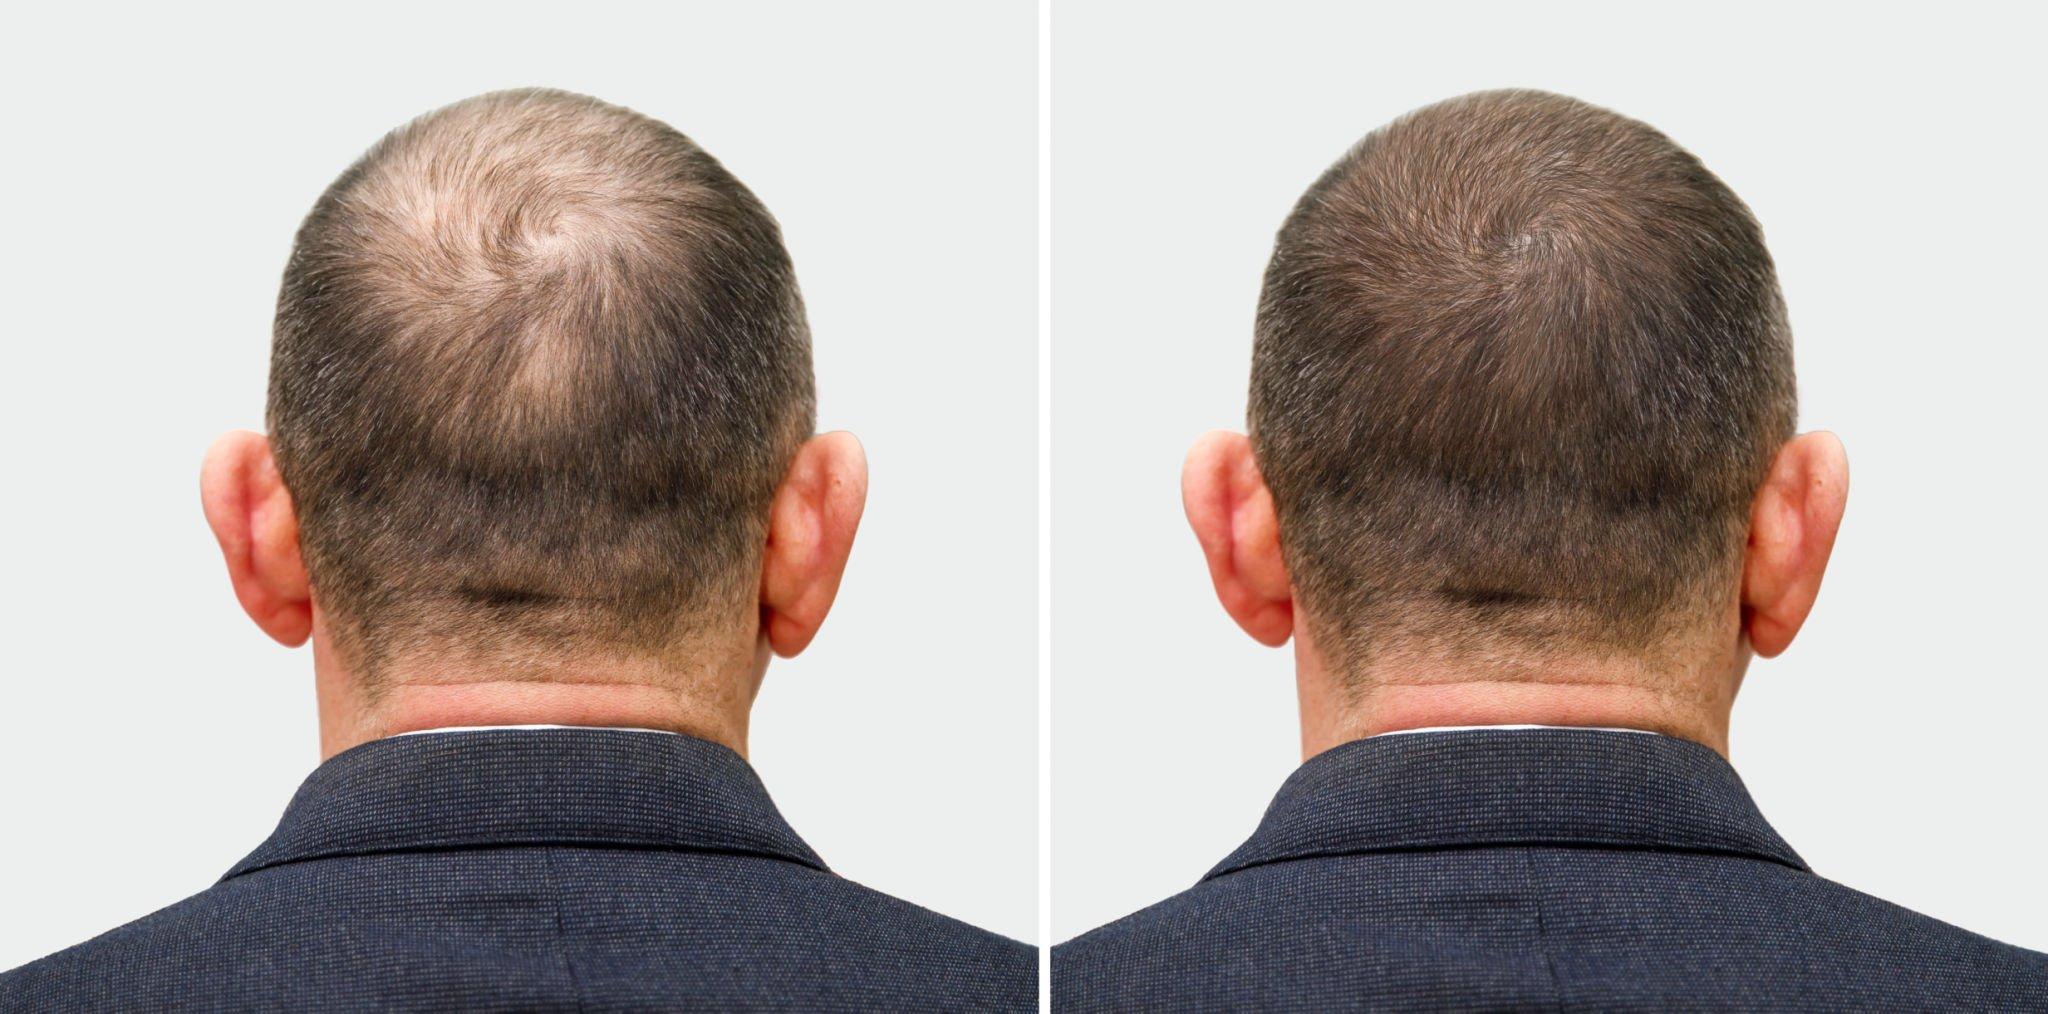 Can You Wash Your Hair Normally After a Hair Transplant?